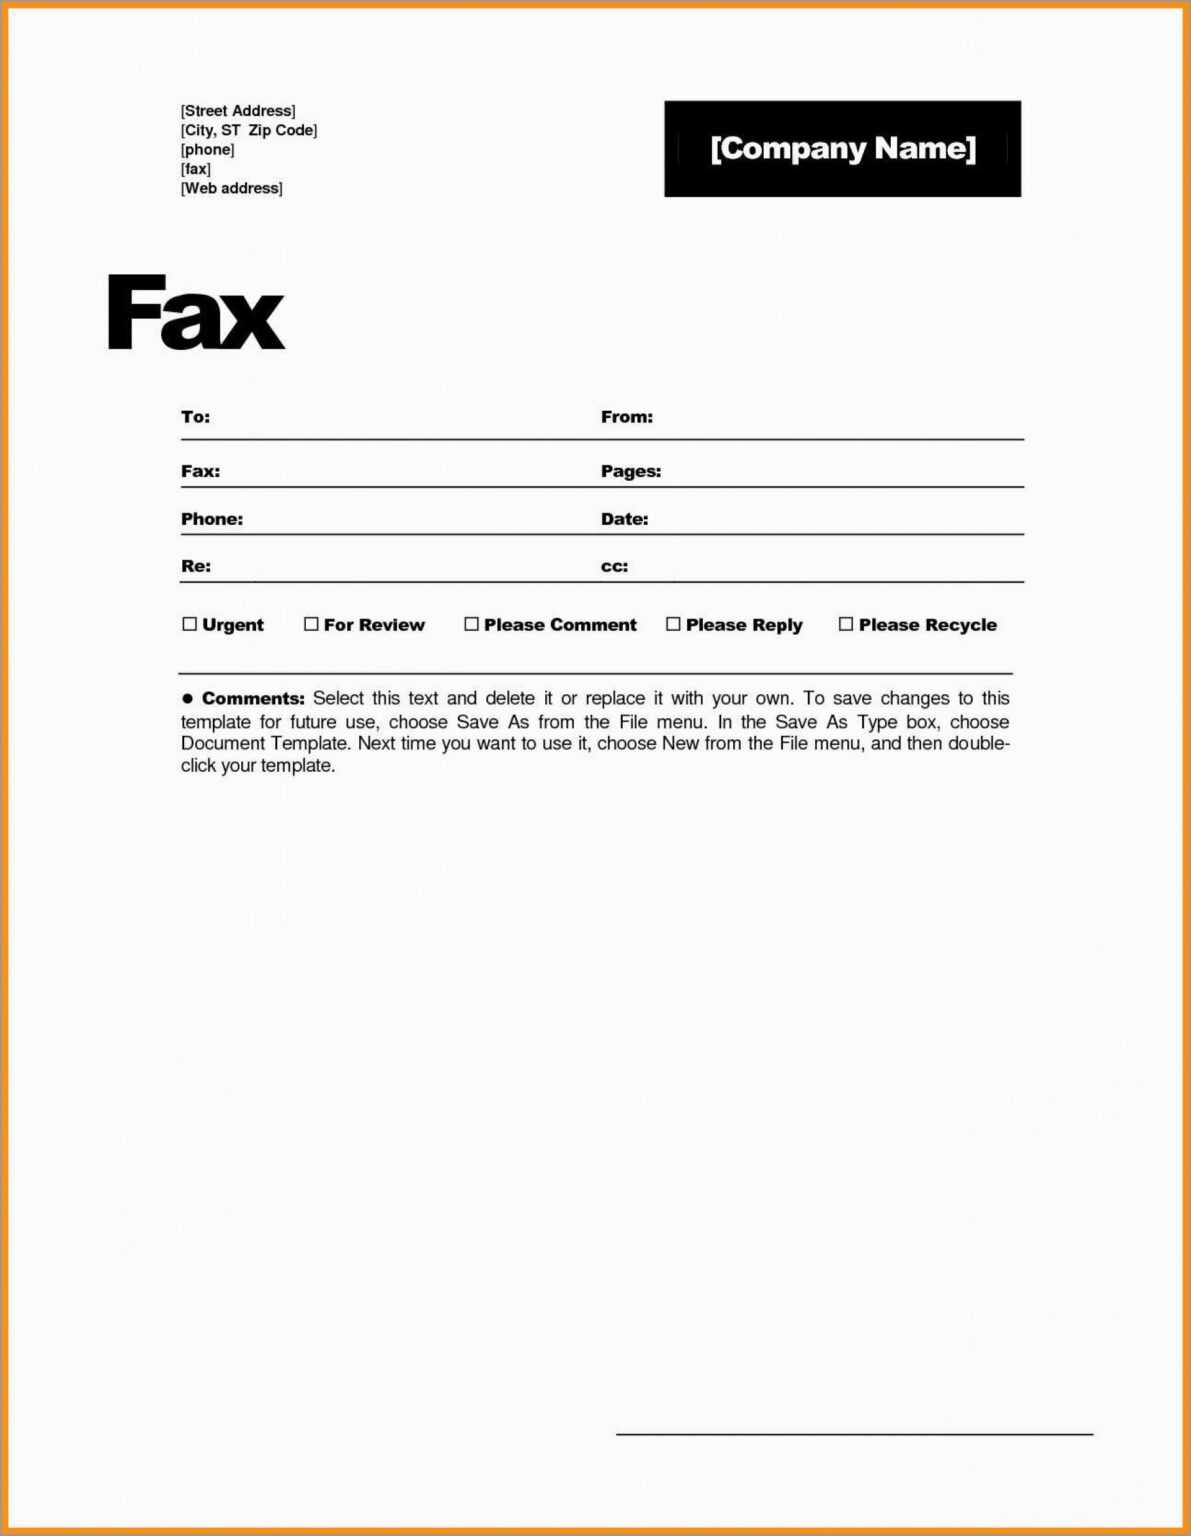 fax-template-word-2010